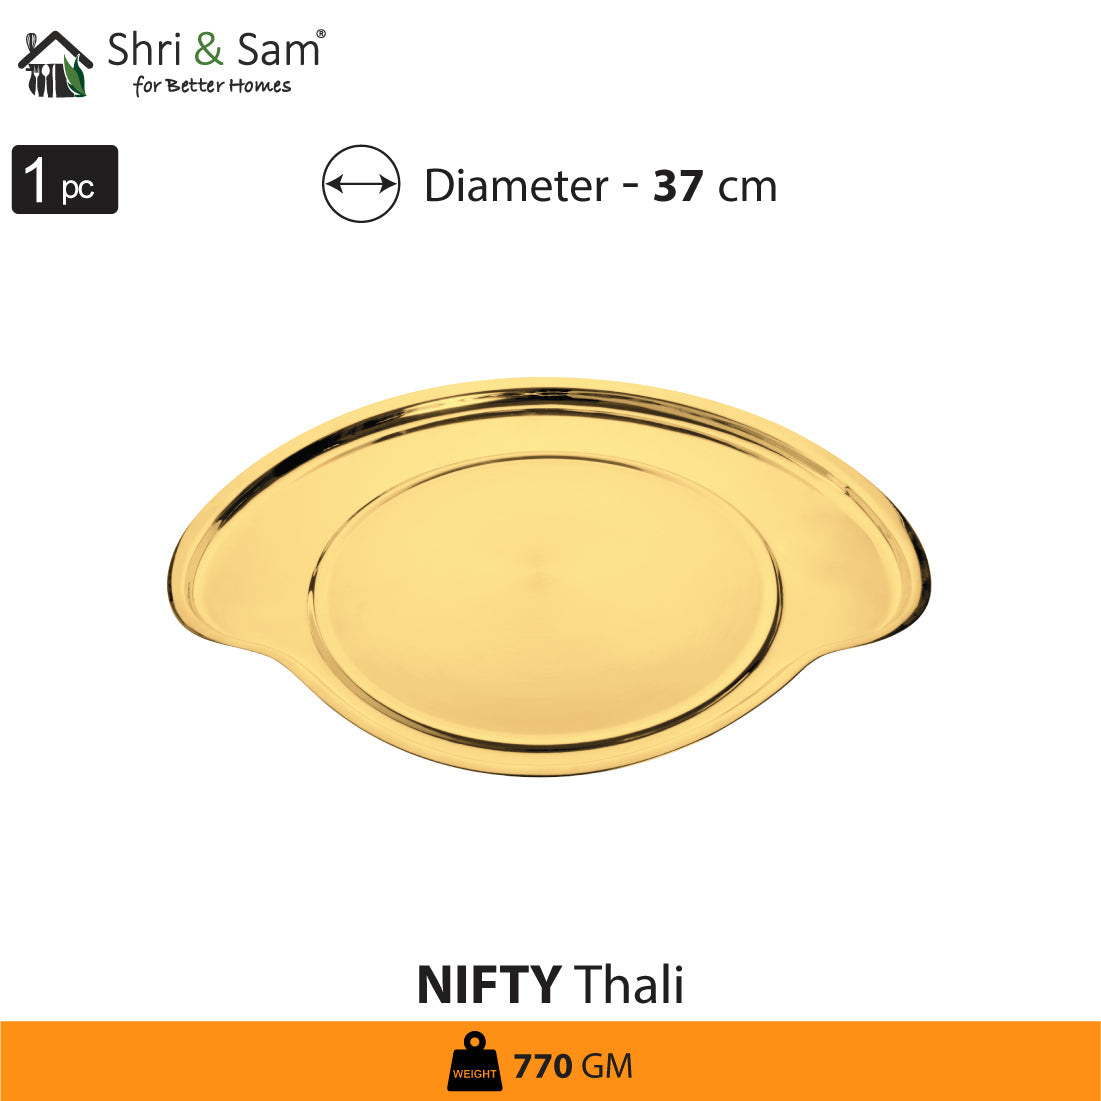 Stainless Steel Small Thali Set with Gold PVD Coating Nifty